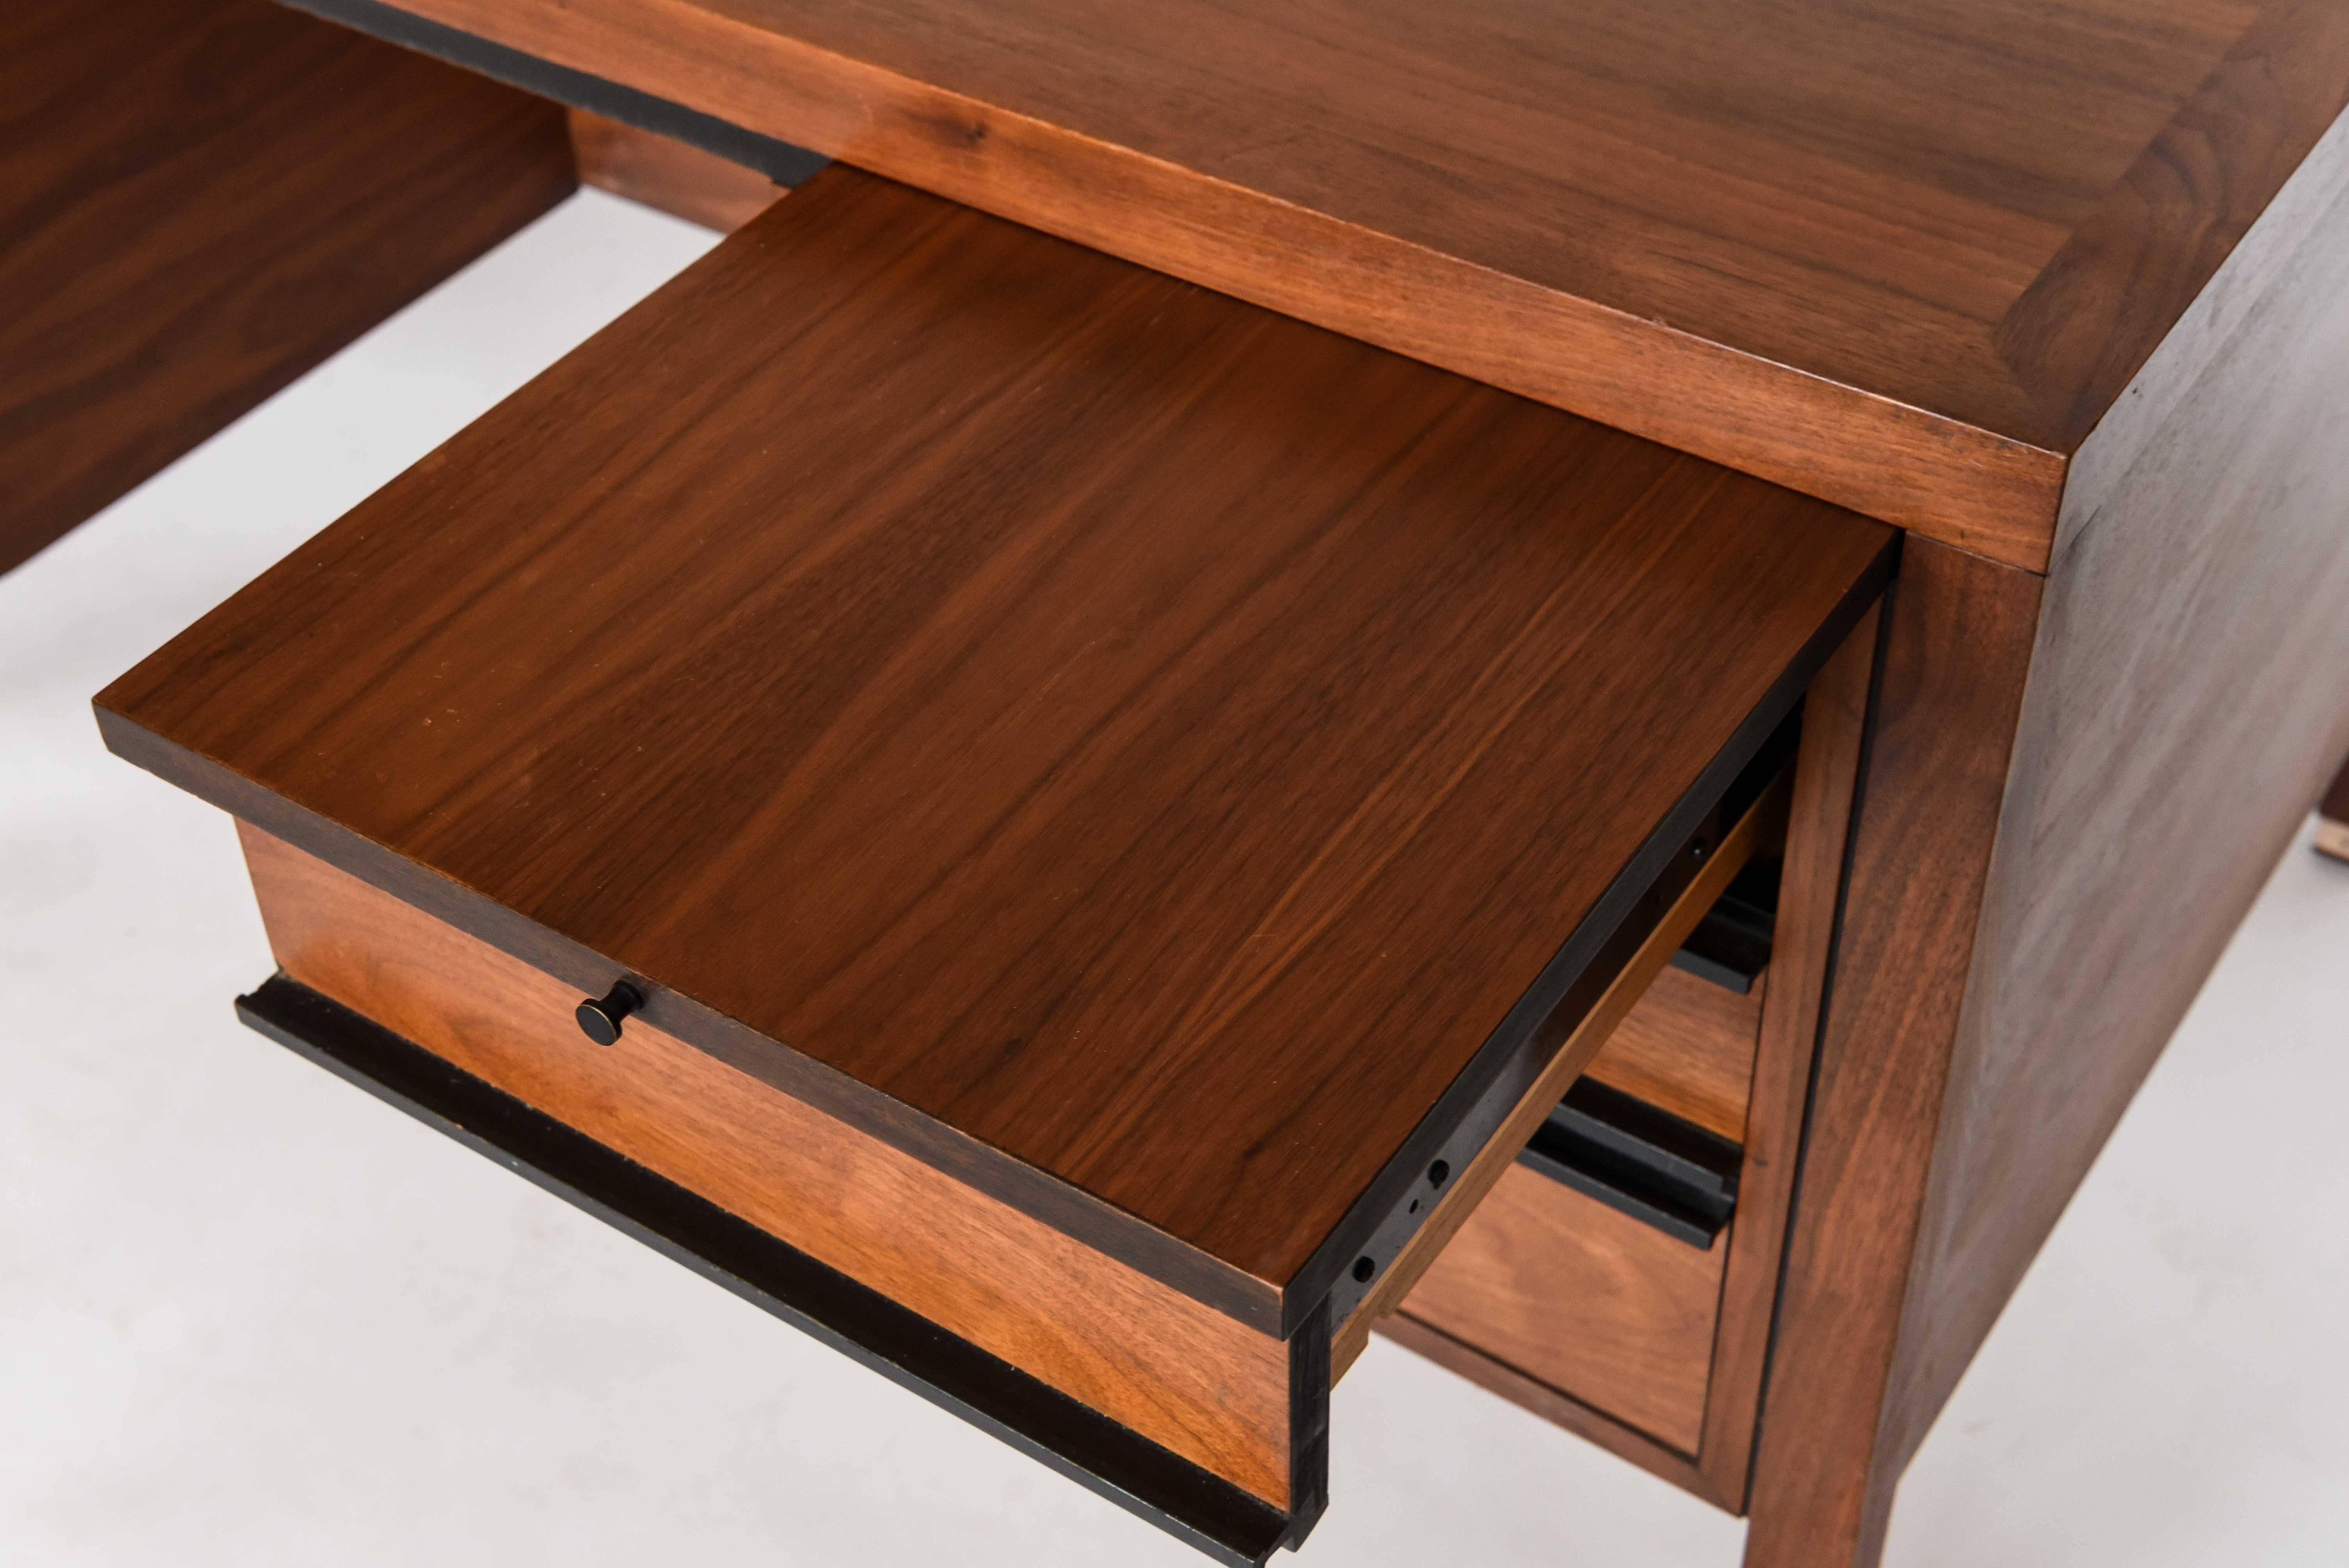 This sleek midcentury desk was produced by Directional for Calvin Furniture Co. and is frequently attributed to Paul McCobb along with more pieces of this set.
Tagged inside left hand drawer: Directional, Calvin Furniture Co. Grand Rapids Michigan.